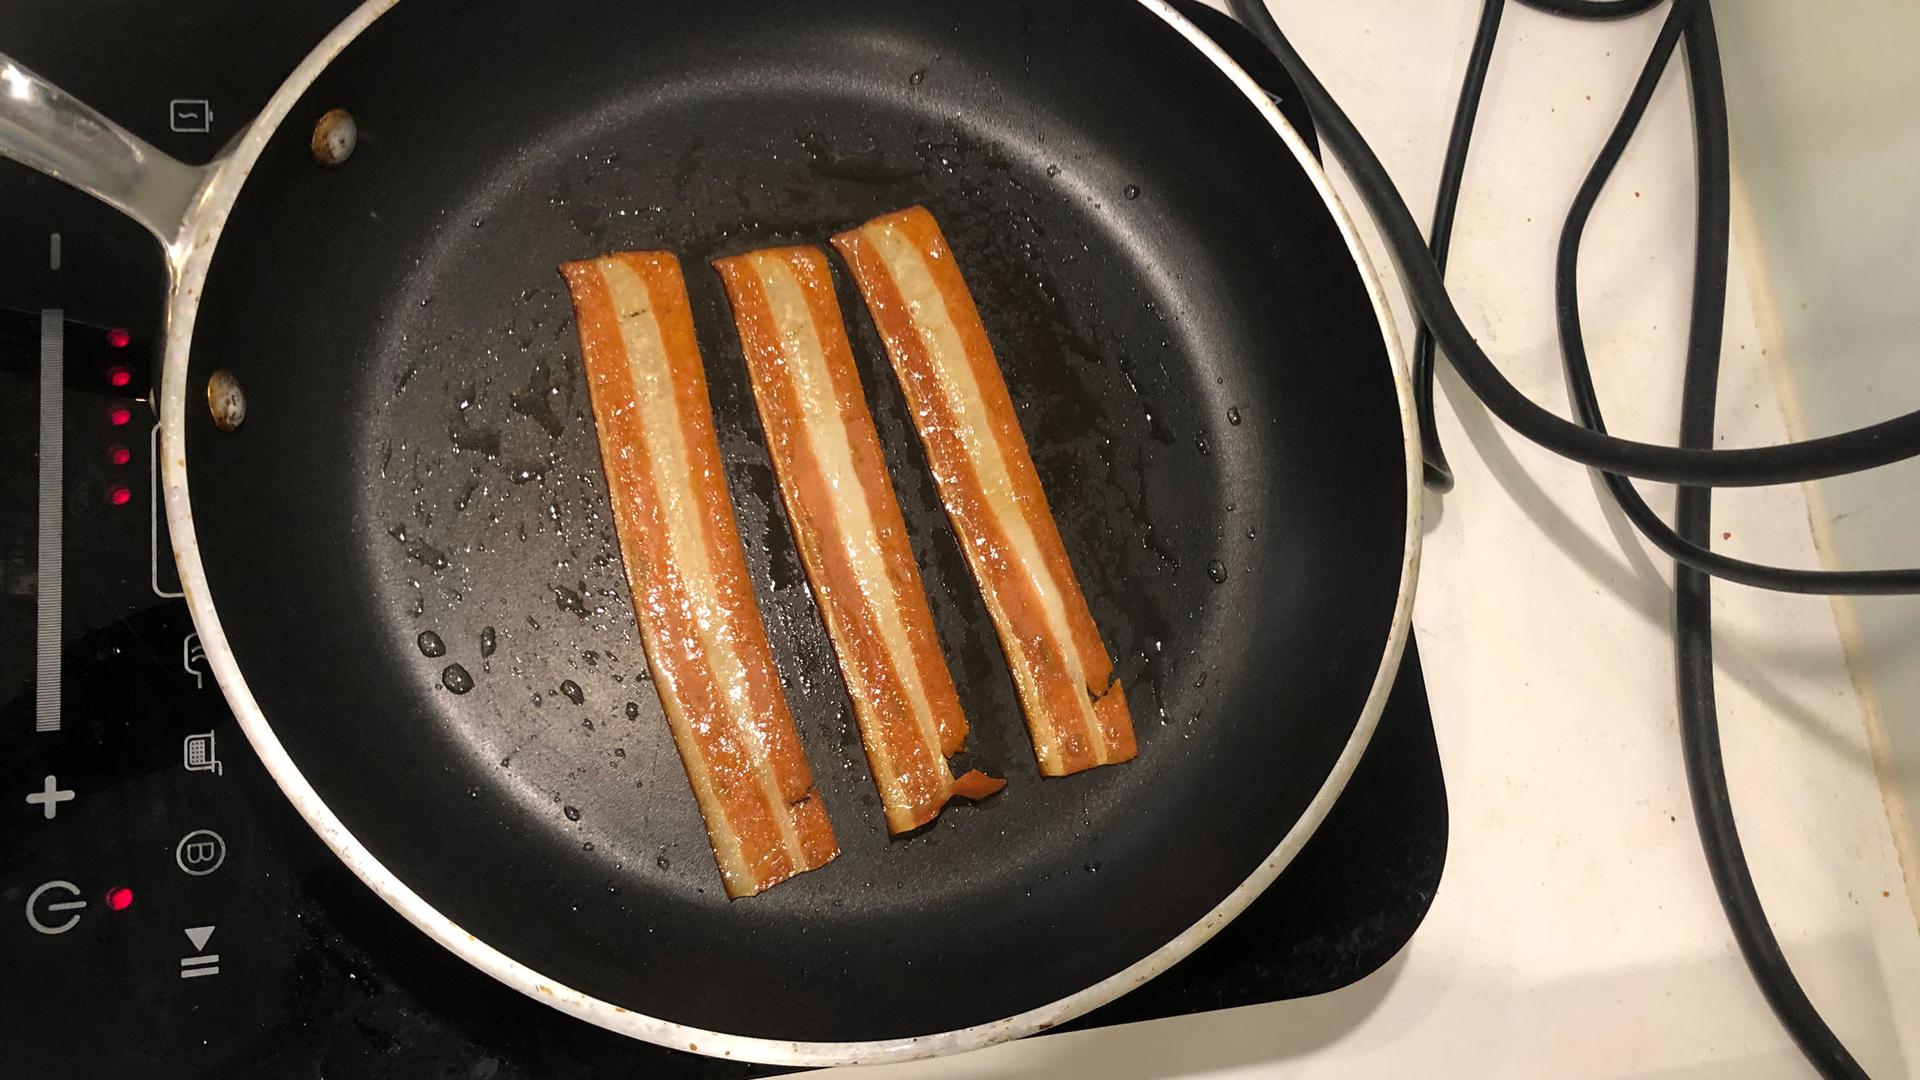 In a hot pan, the streaky bacon made by La Vie starts curling within minutes, bubbling and crisping…just like, well, bacon.